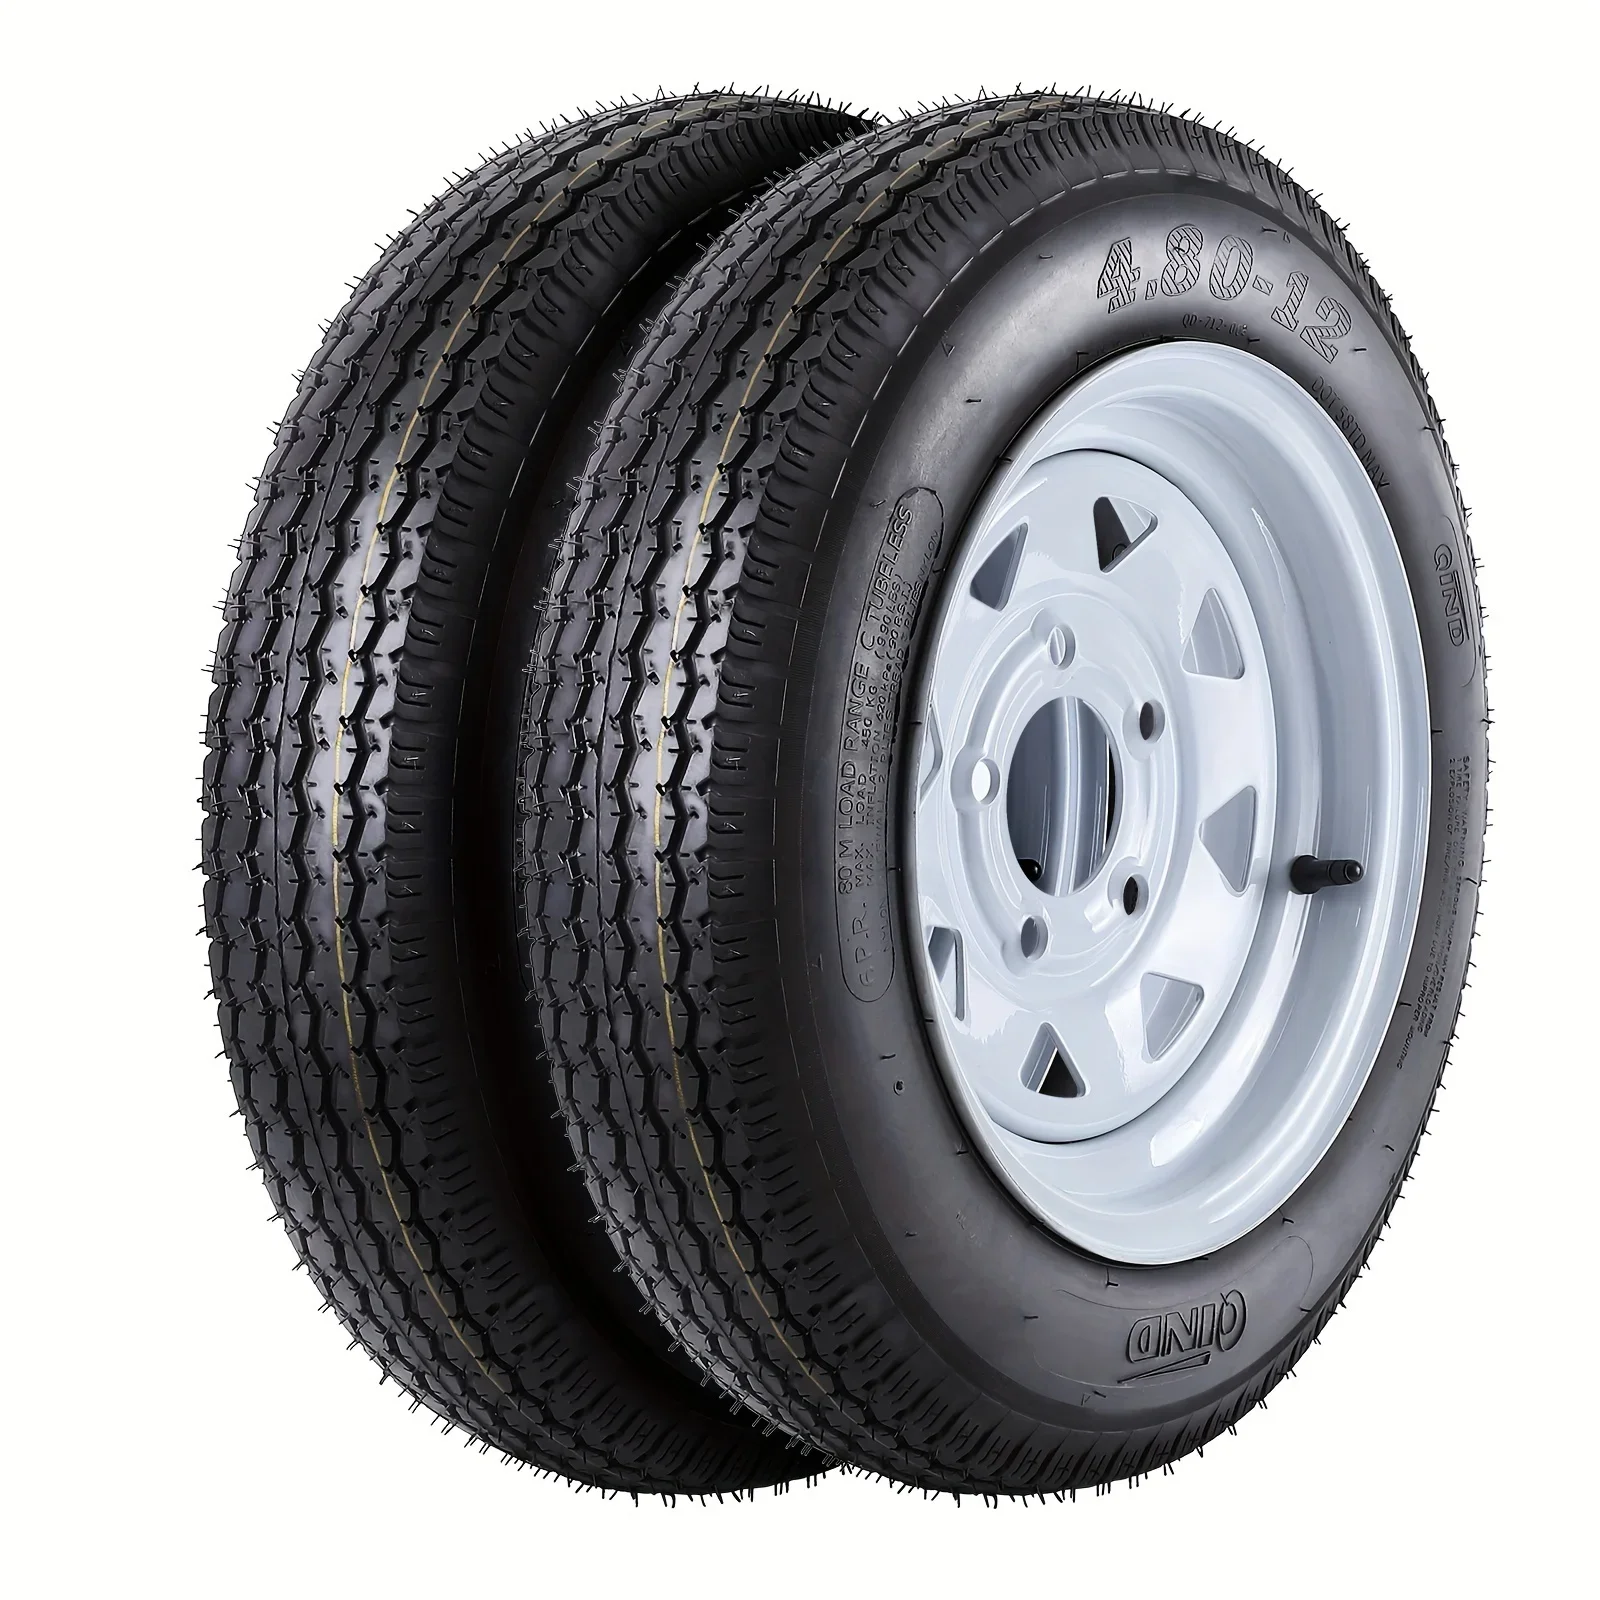 

High quality 2pcs 5.30-12 6PR Load Range C Trailer Tires with durable 12'' rims for car accessories. Featuring a 5 lug pattern o